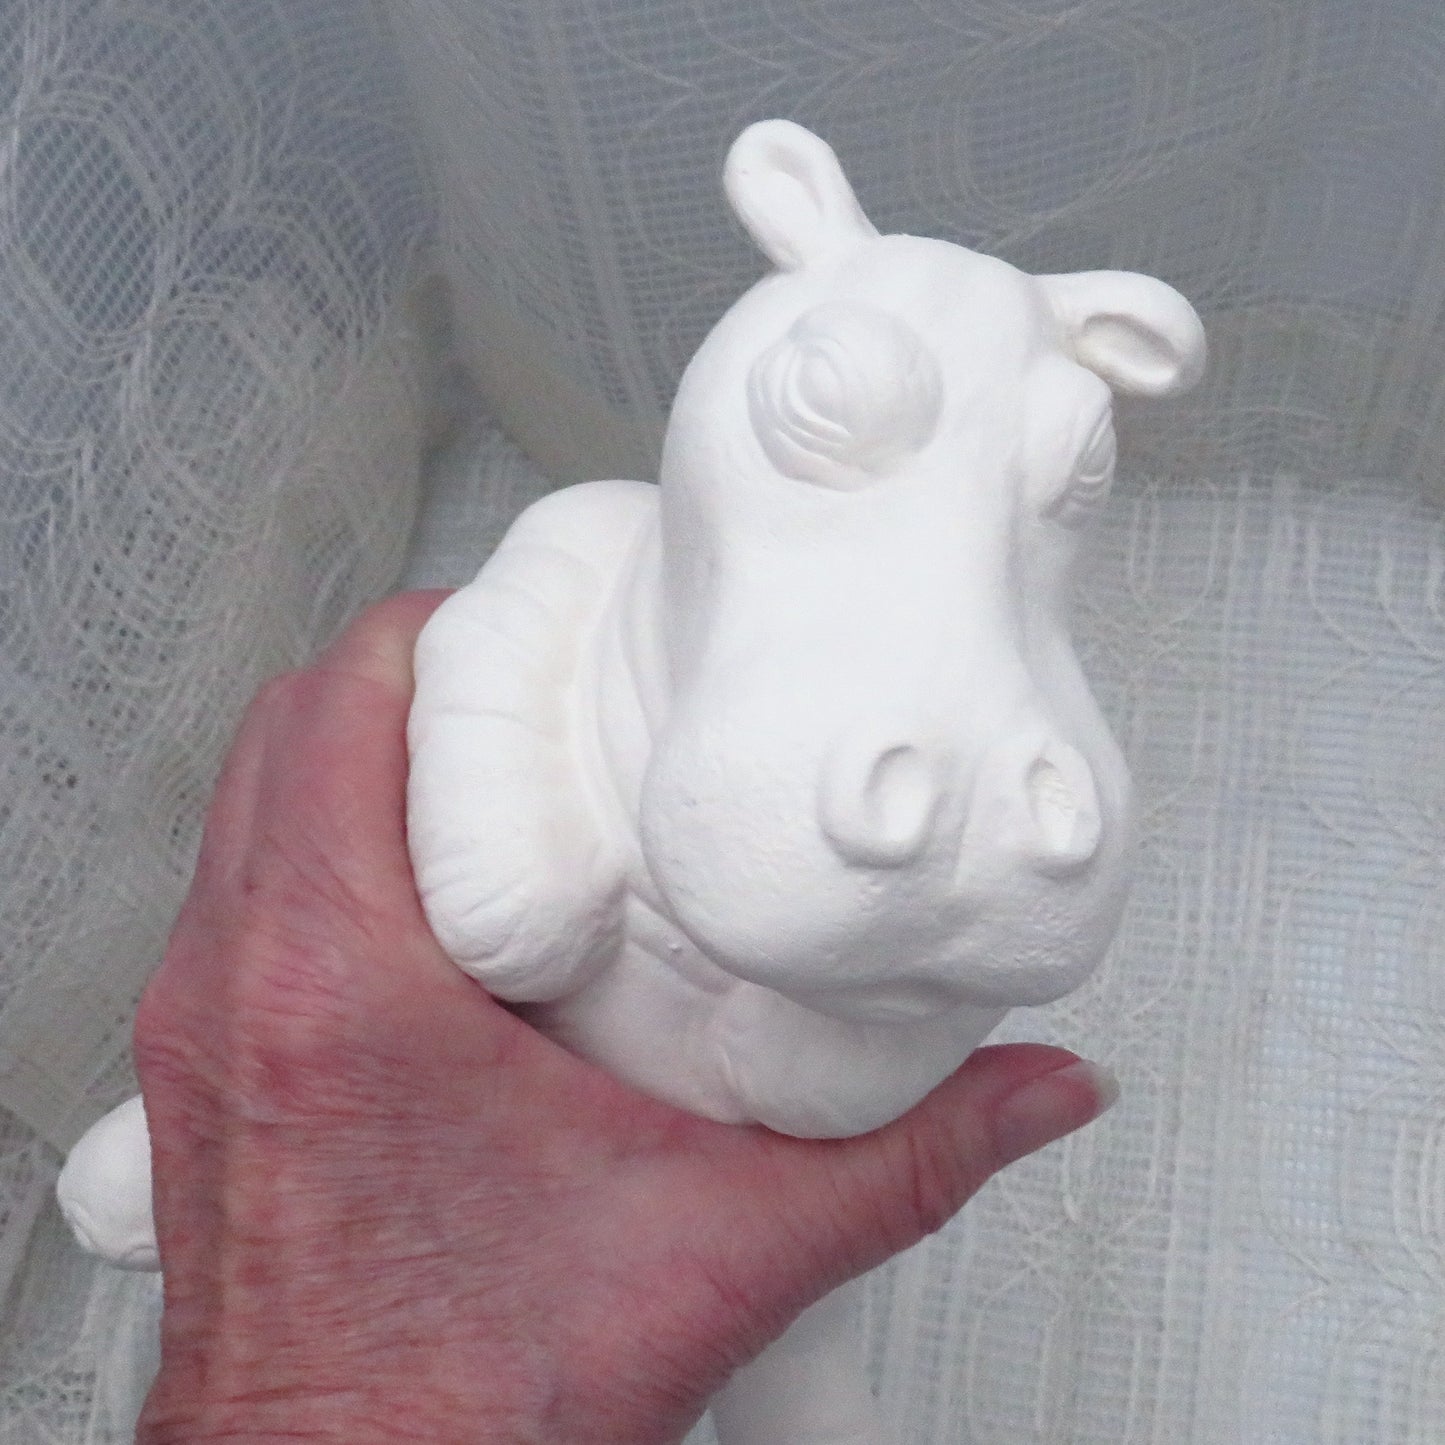 Unpainted Ceramic Bisque Hippo on Back Figurine, Ready to Paint Ceramic Hippo Statue